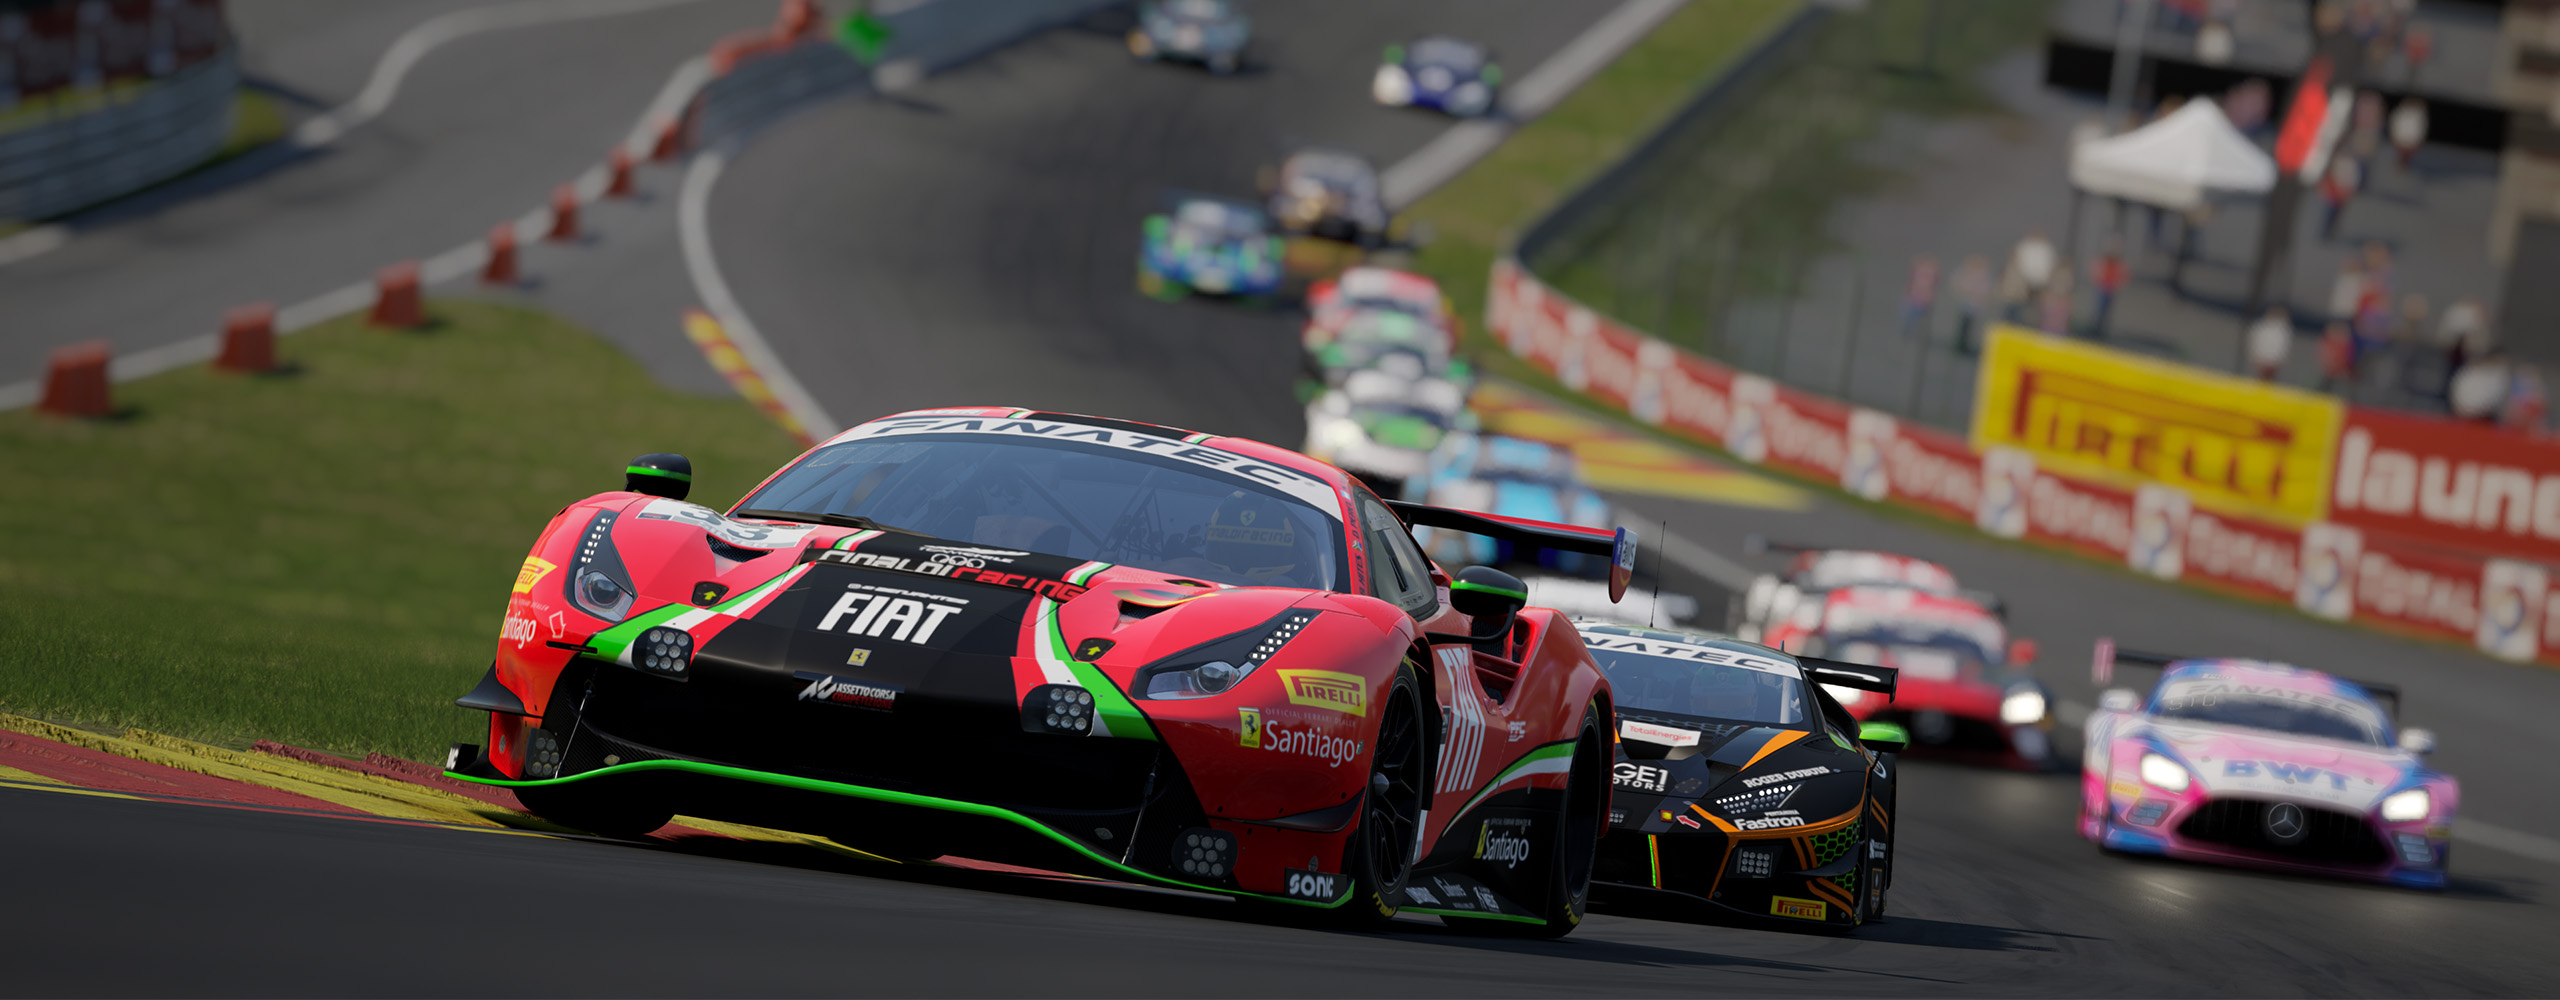 Assetto Corsa Competizione PlayStation 5 and Xbox Series X/S Launch Update and Next Steps